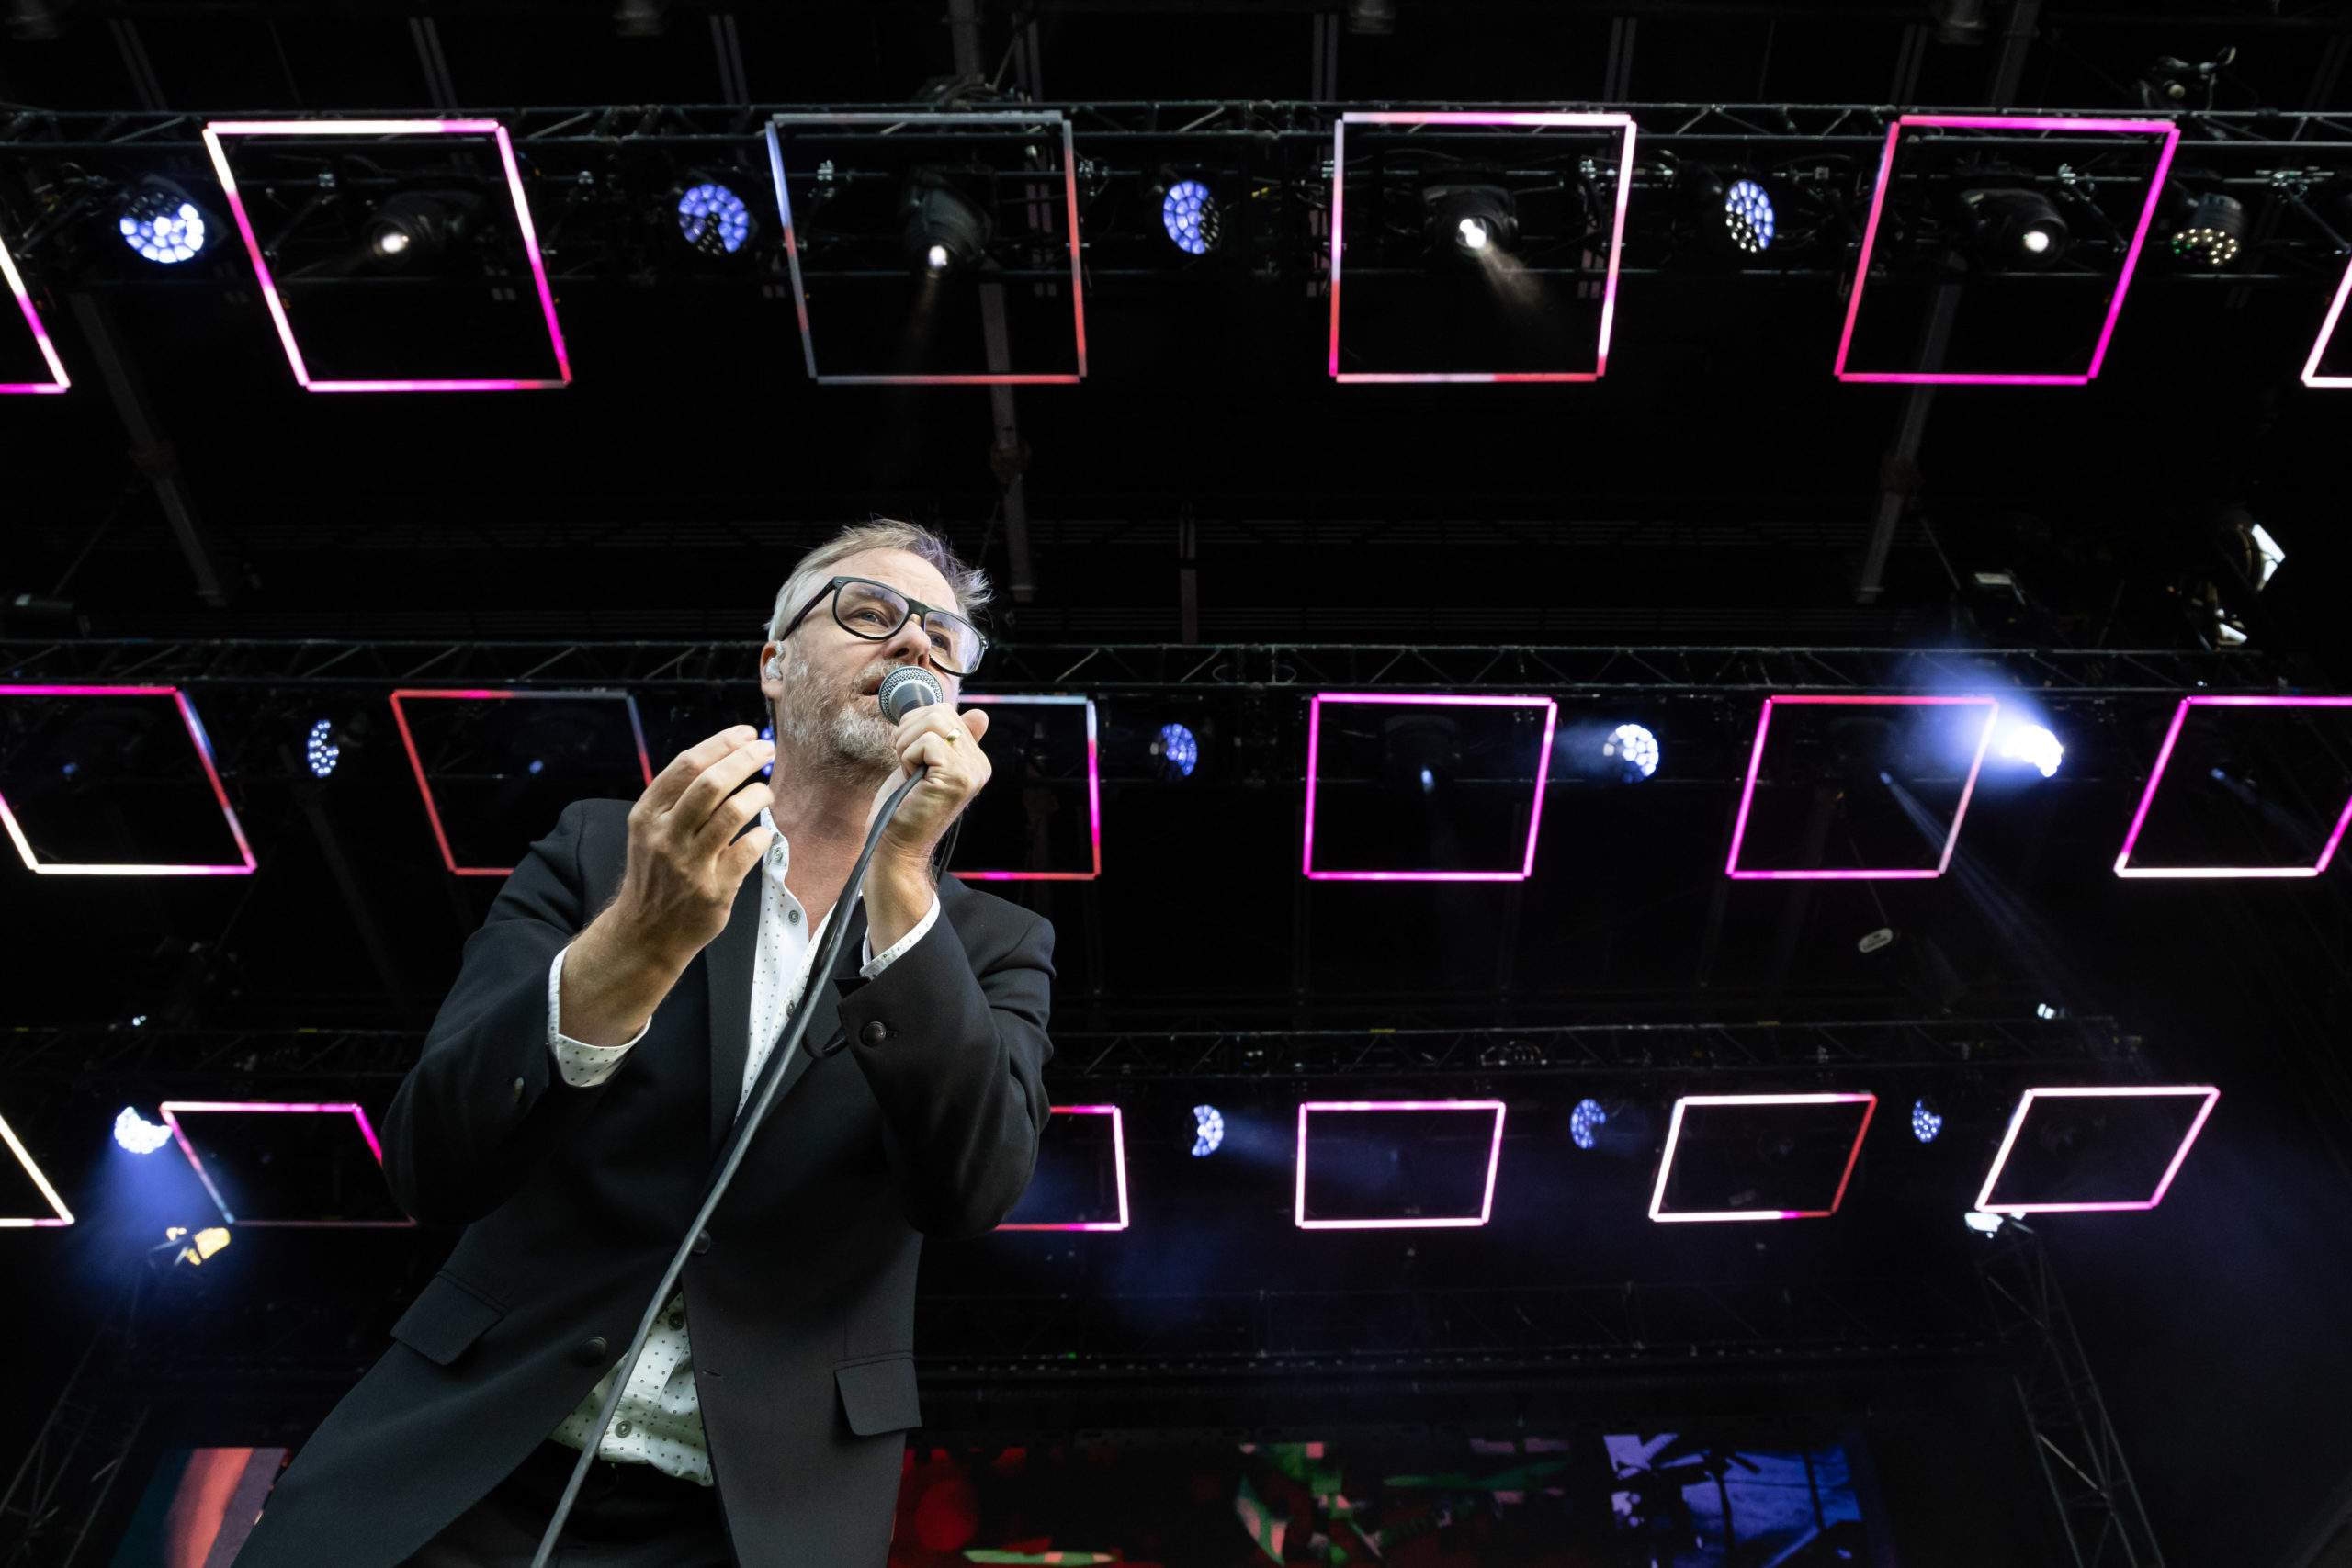 The front man from The National, Matt Berninger, stands under square lights on the stage at Deer Lake Park